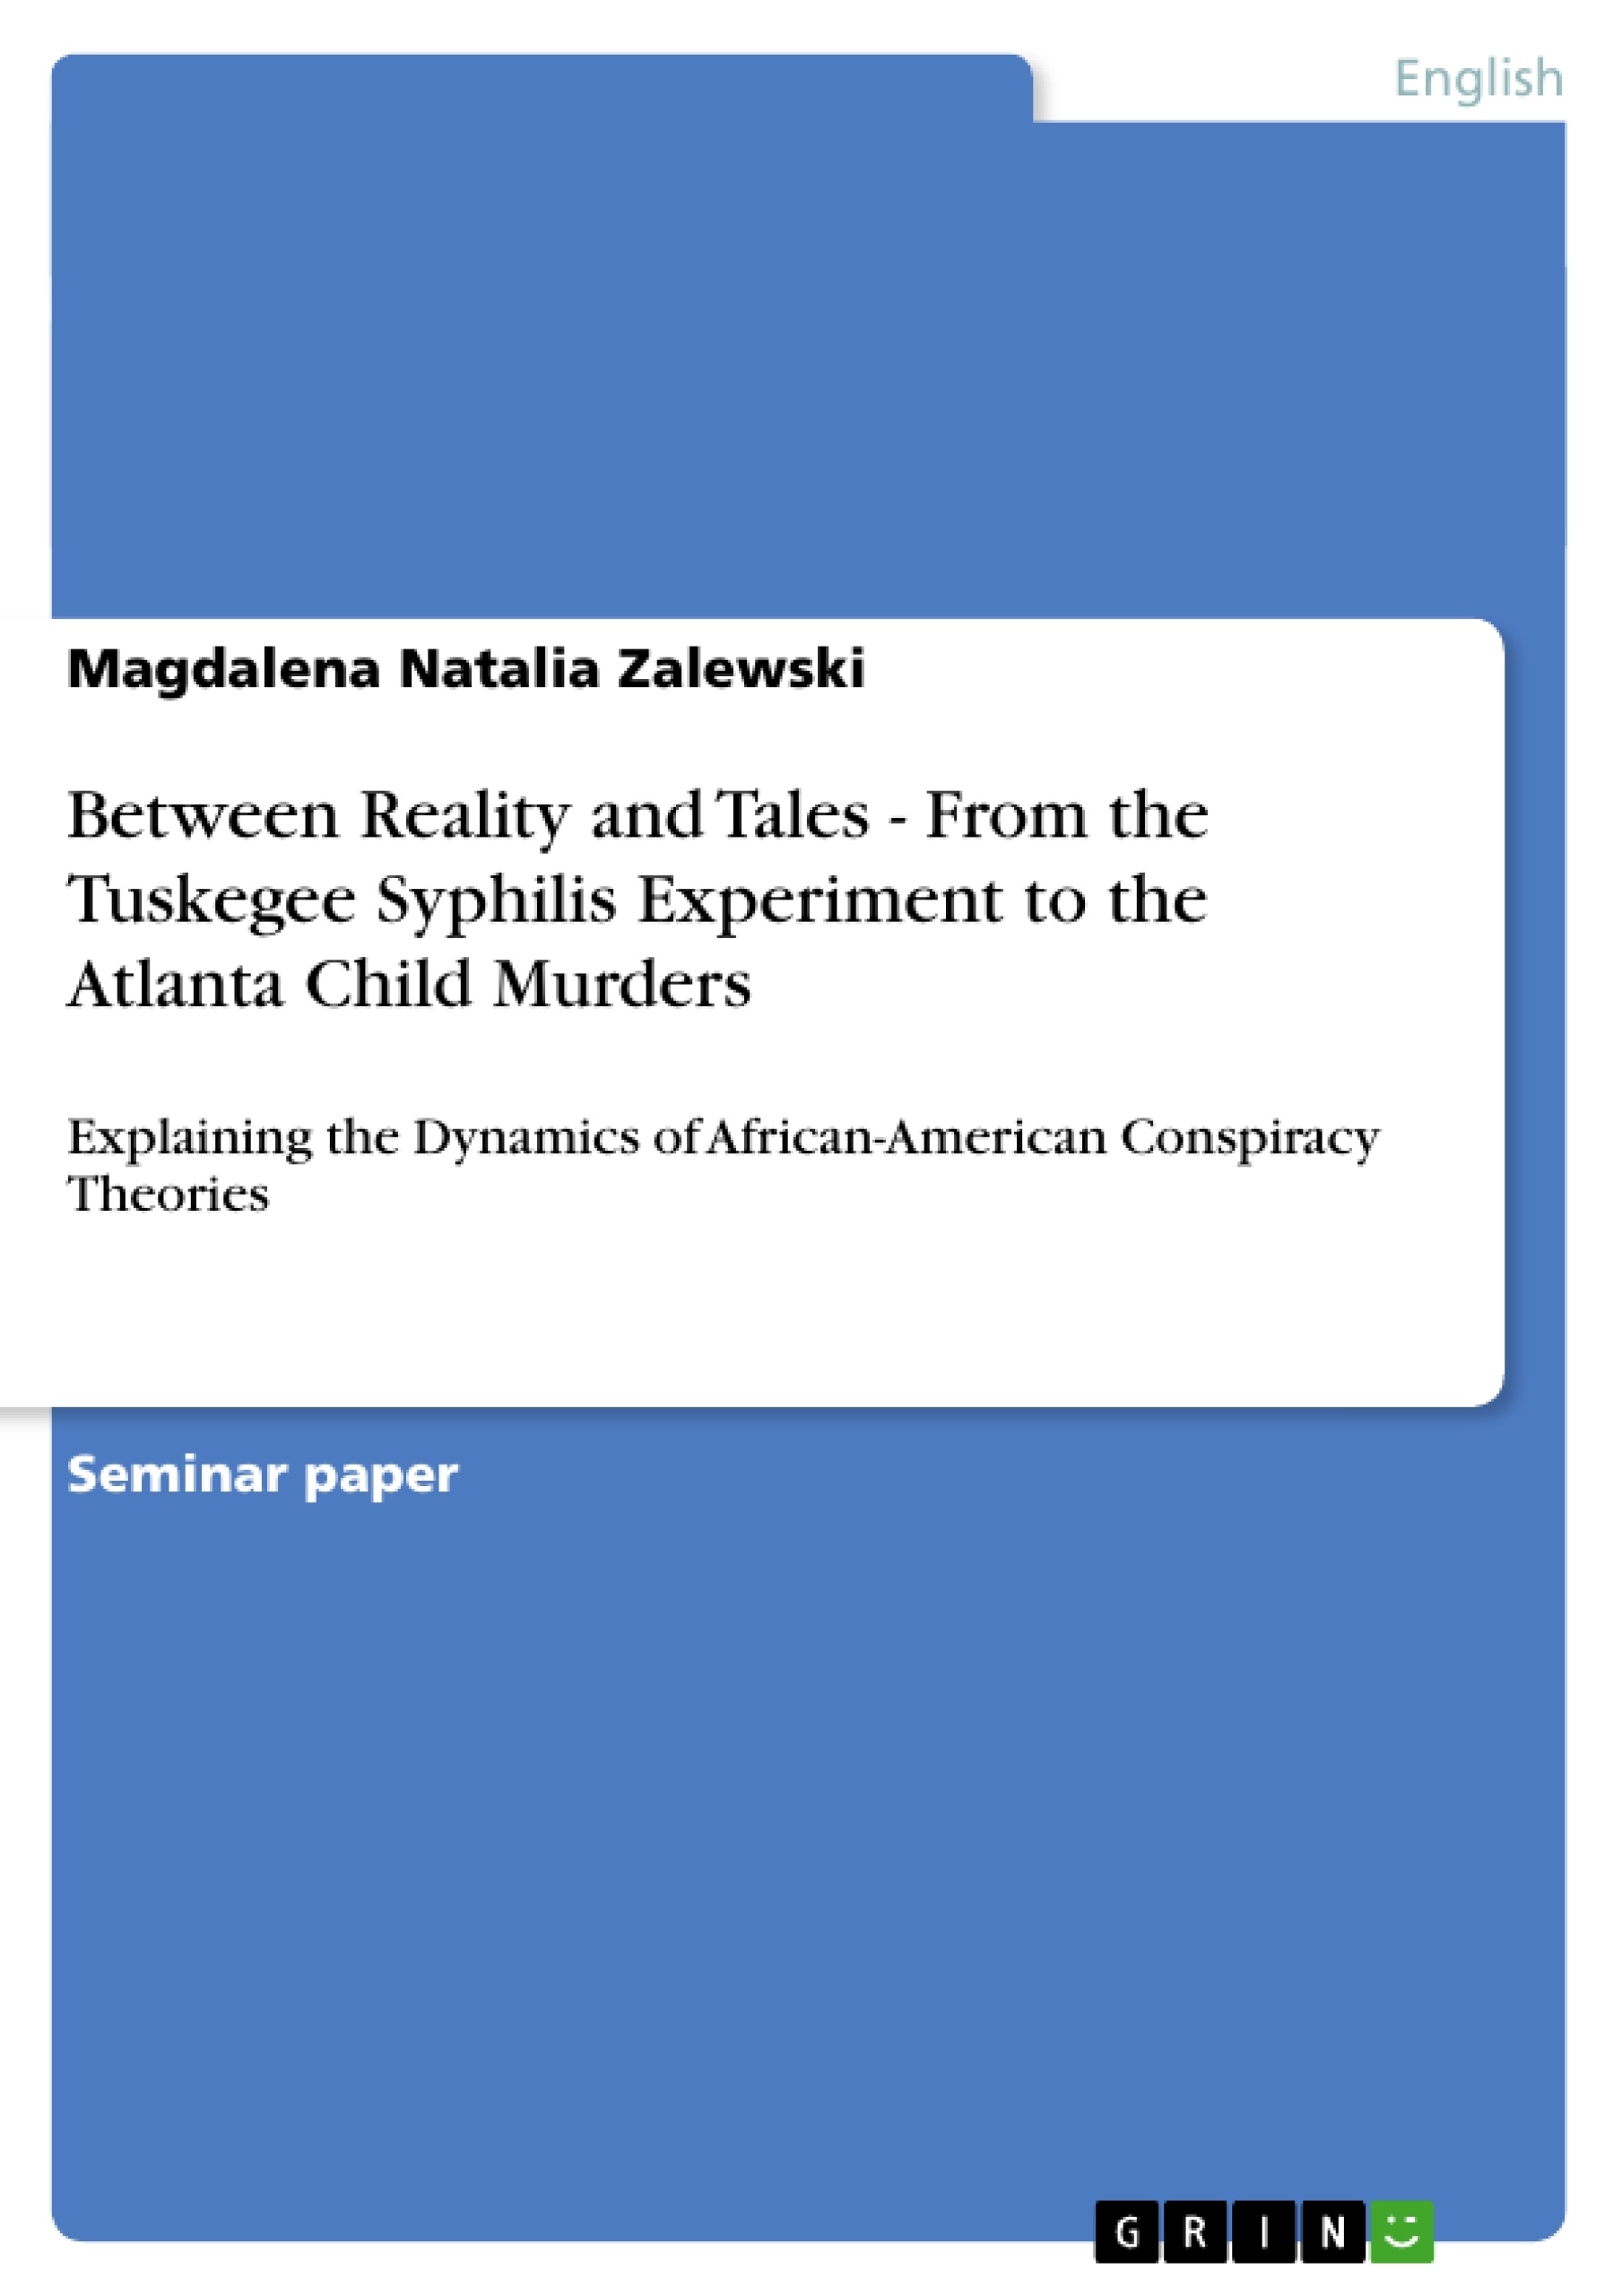 Título: Between Reality and Tales - From the Tuskegee Syphilis Experiment to the Atlanta Child Murders